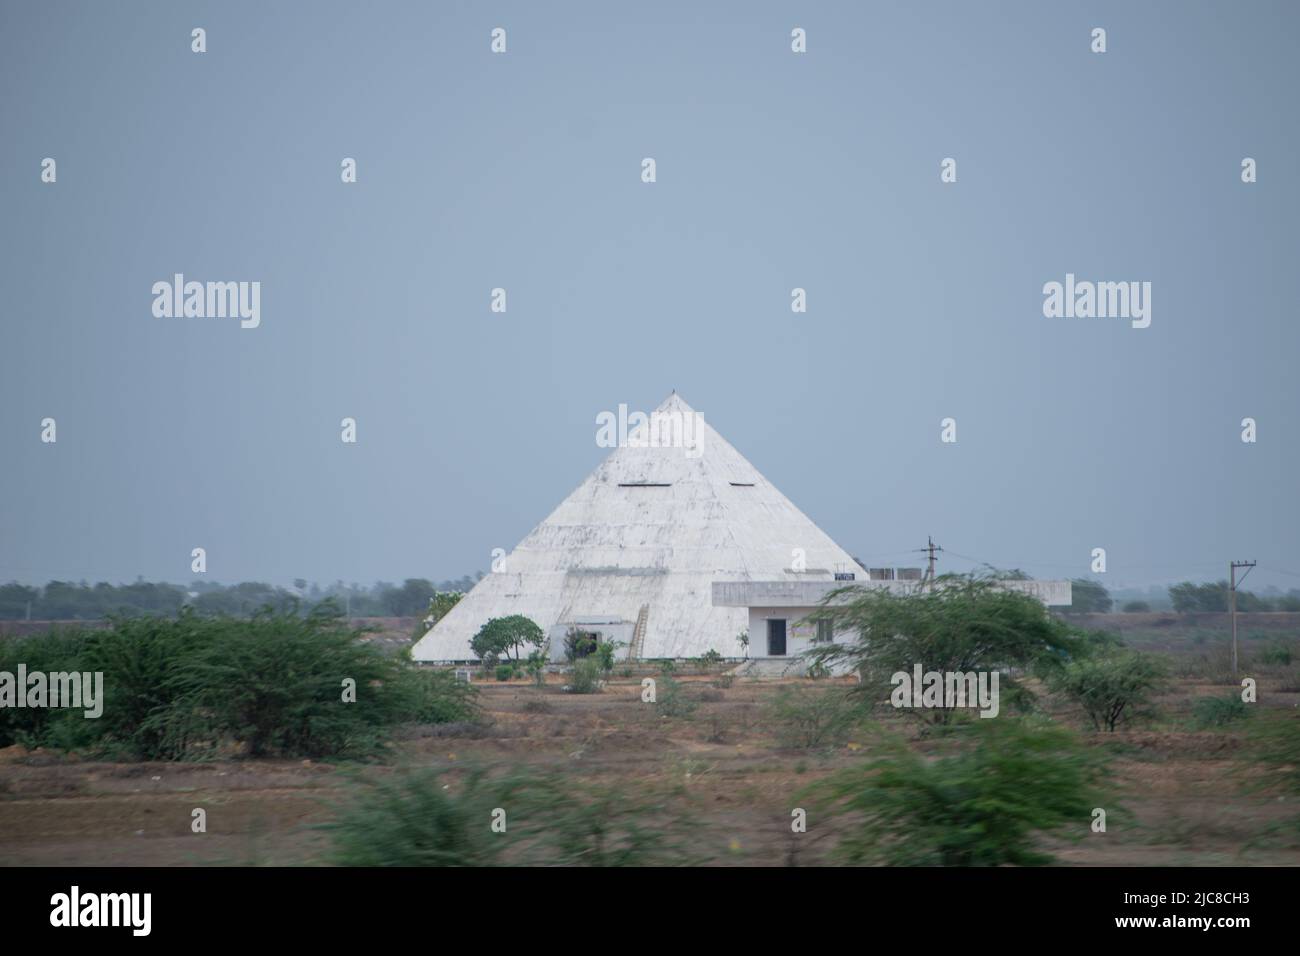 Pyramid like building in India. Stock Photo